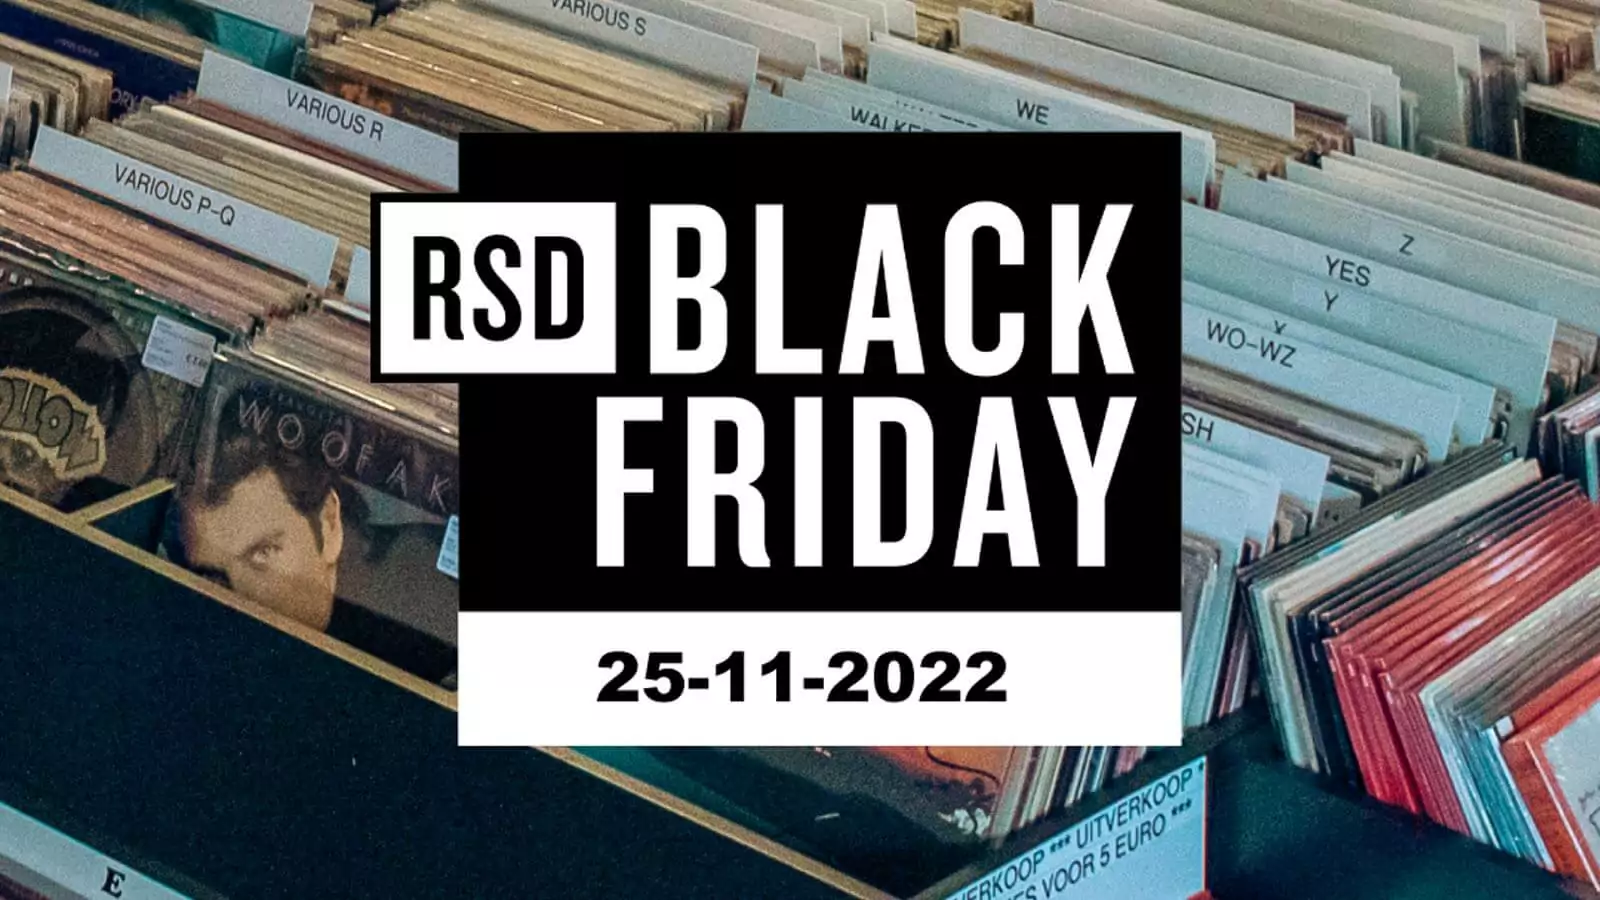 Black Friday Record Store Day 2022 for Metal and Rock Albums